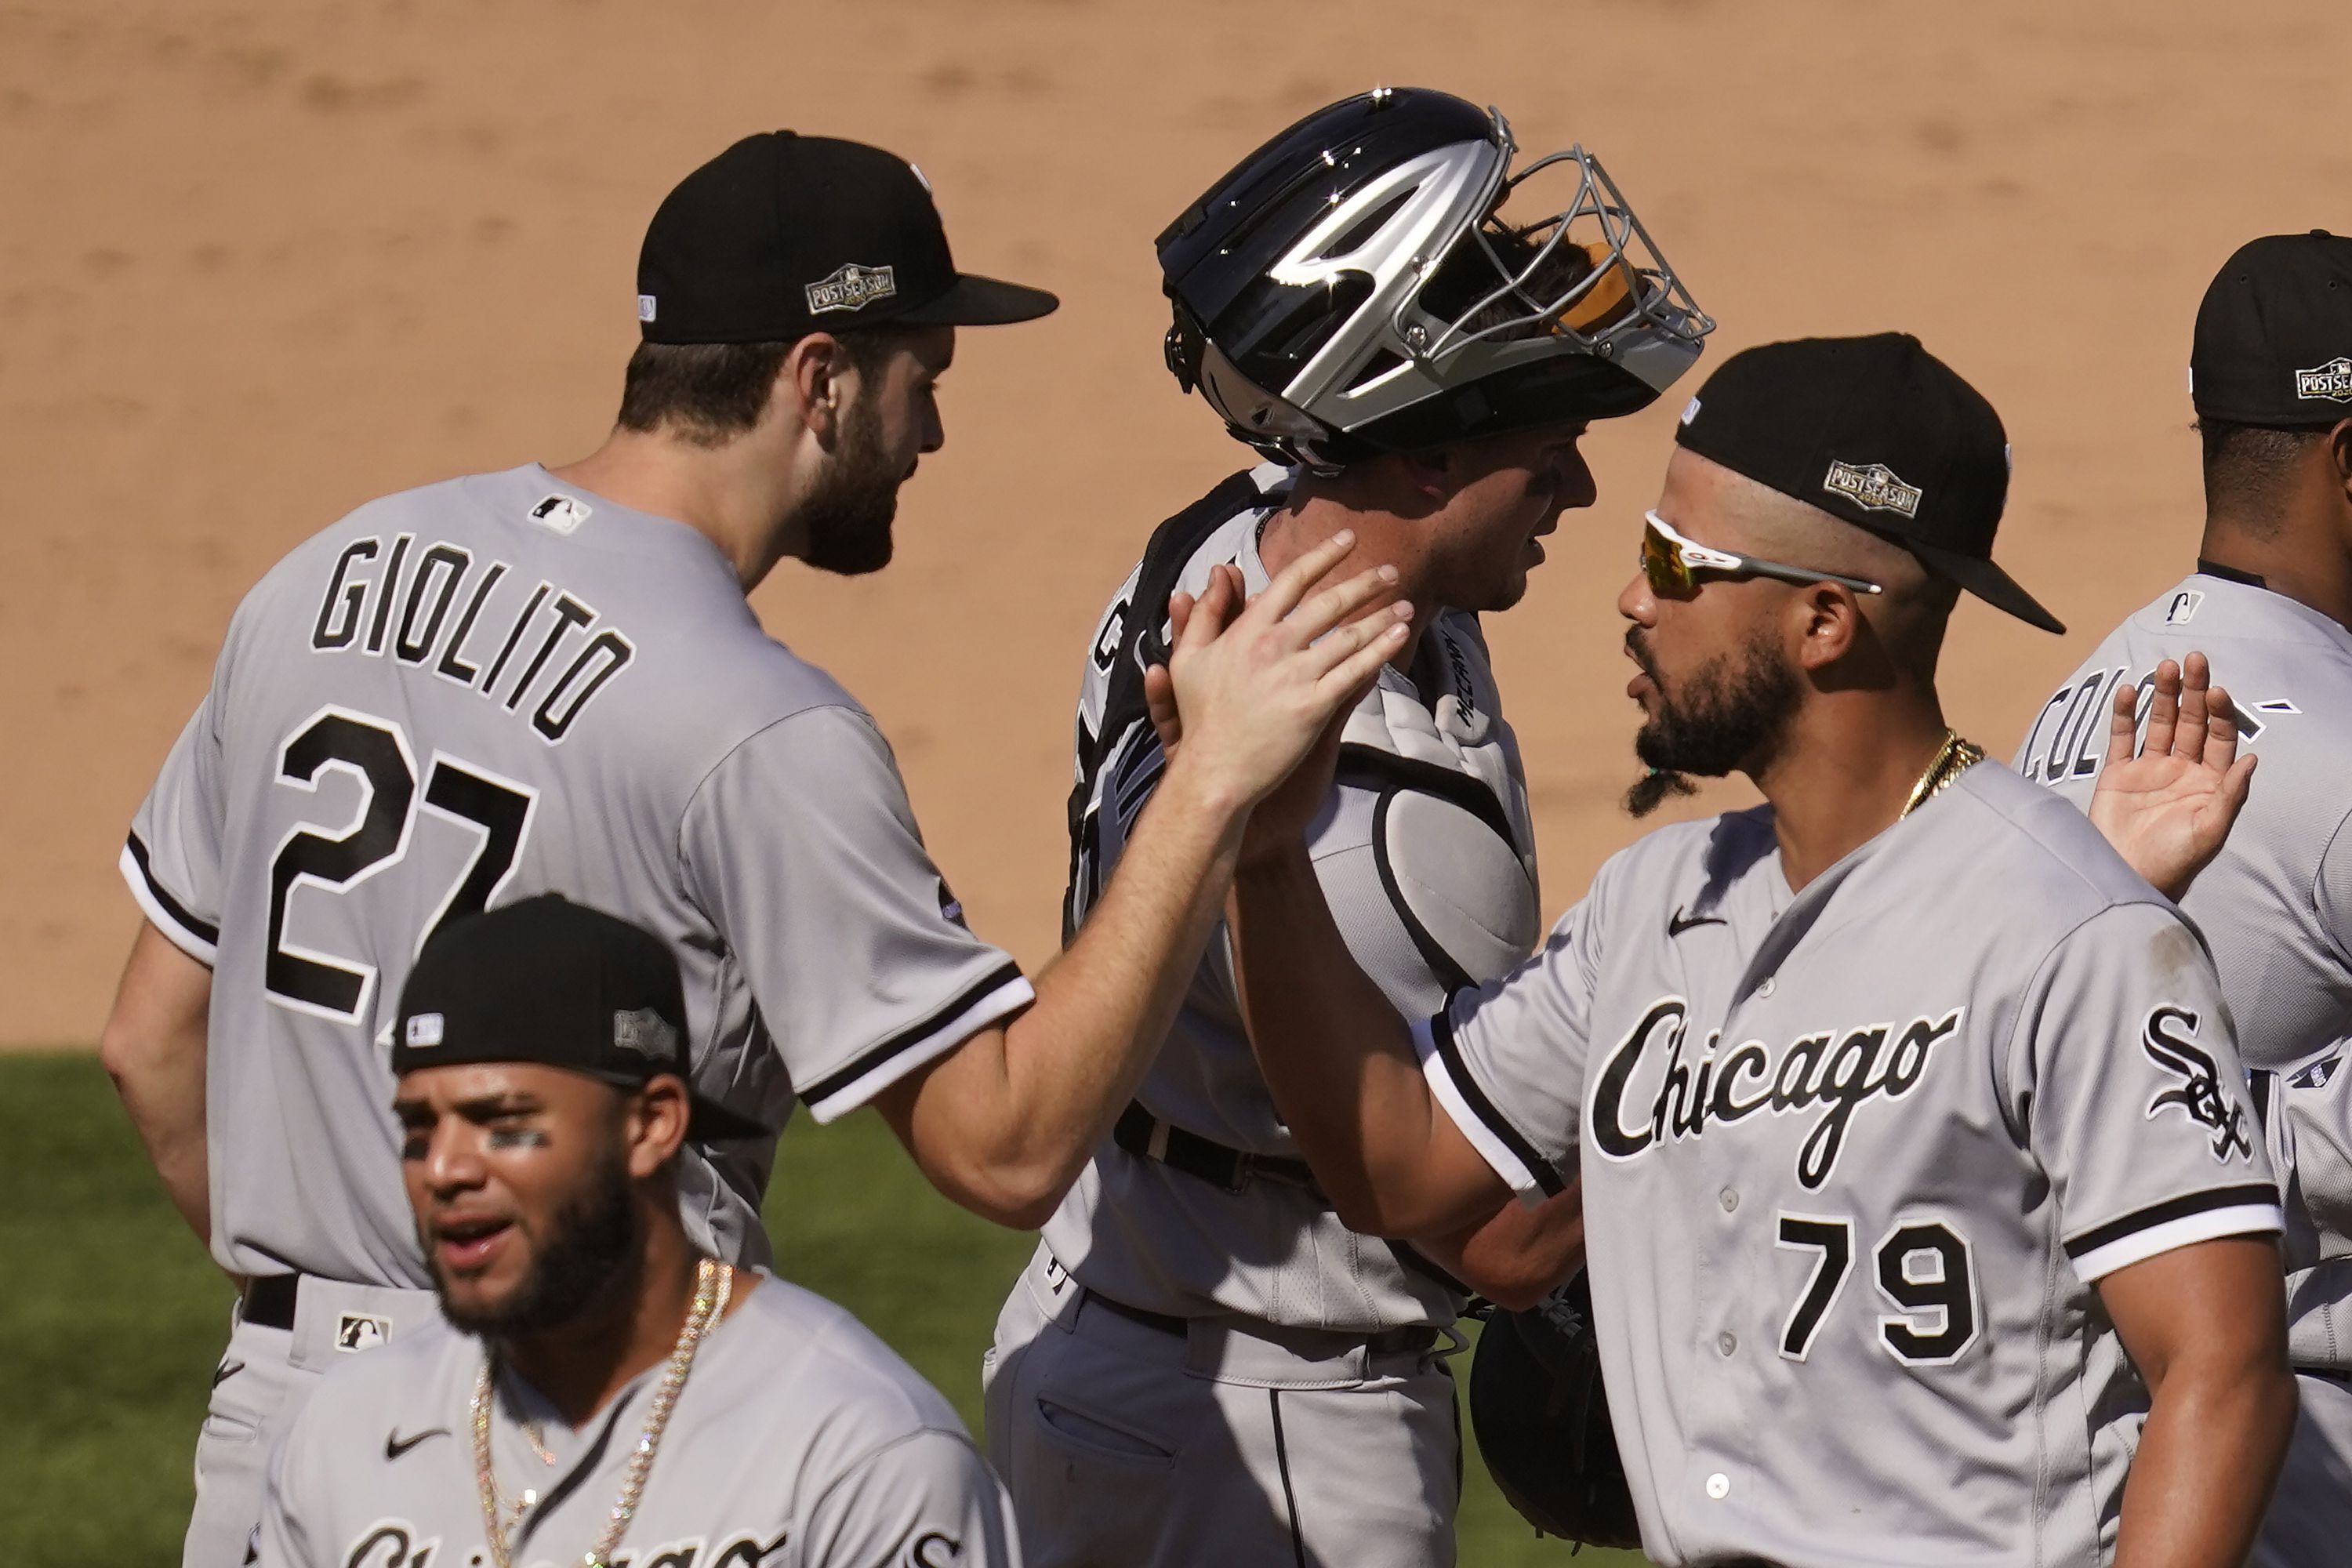 White Sox observations on Lucas Giolito, Yasmani Grandal and Zack